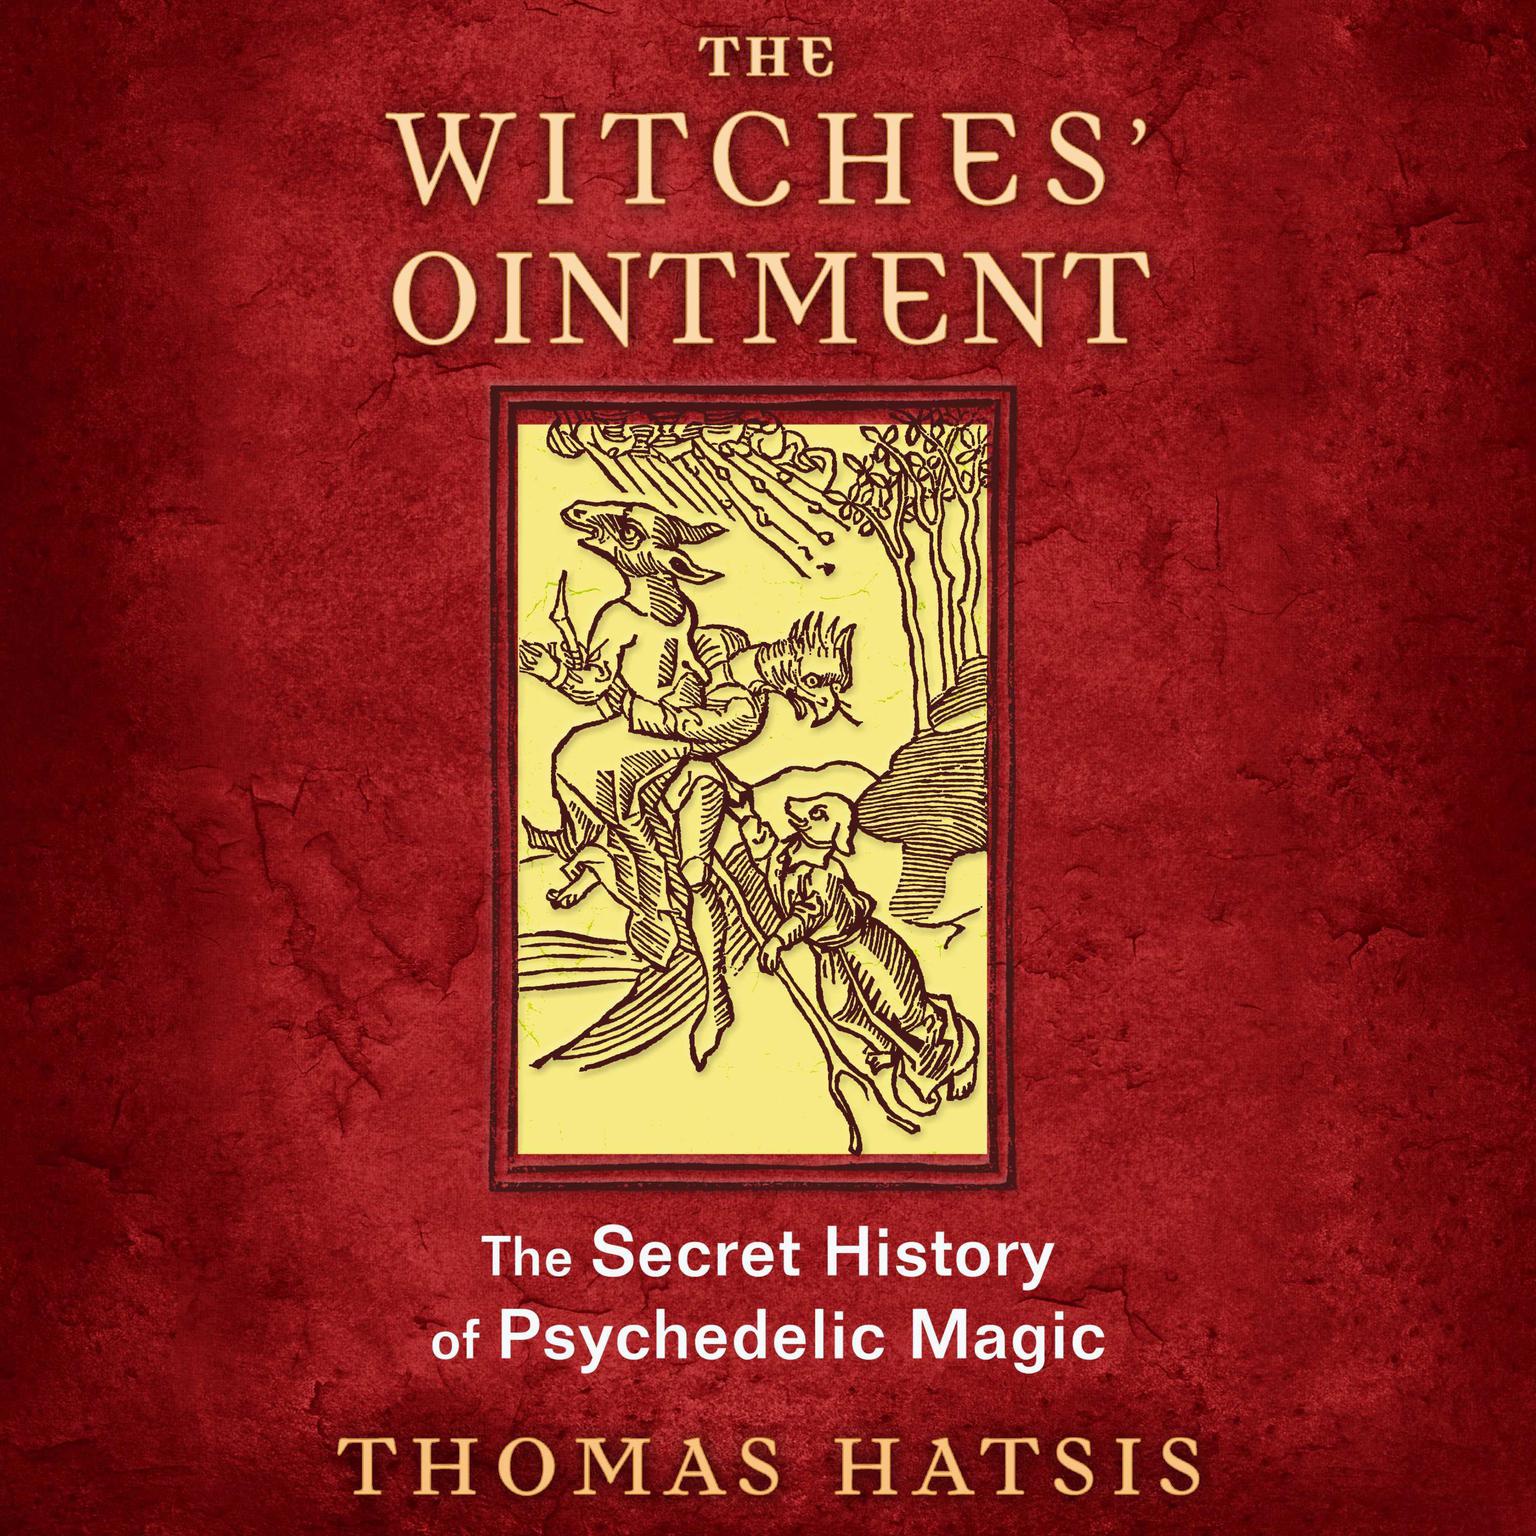 The Witches Ointment: The Secret History of Psychedelic Magic Audiobook, by Thomas Hatsis